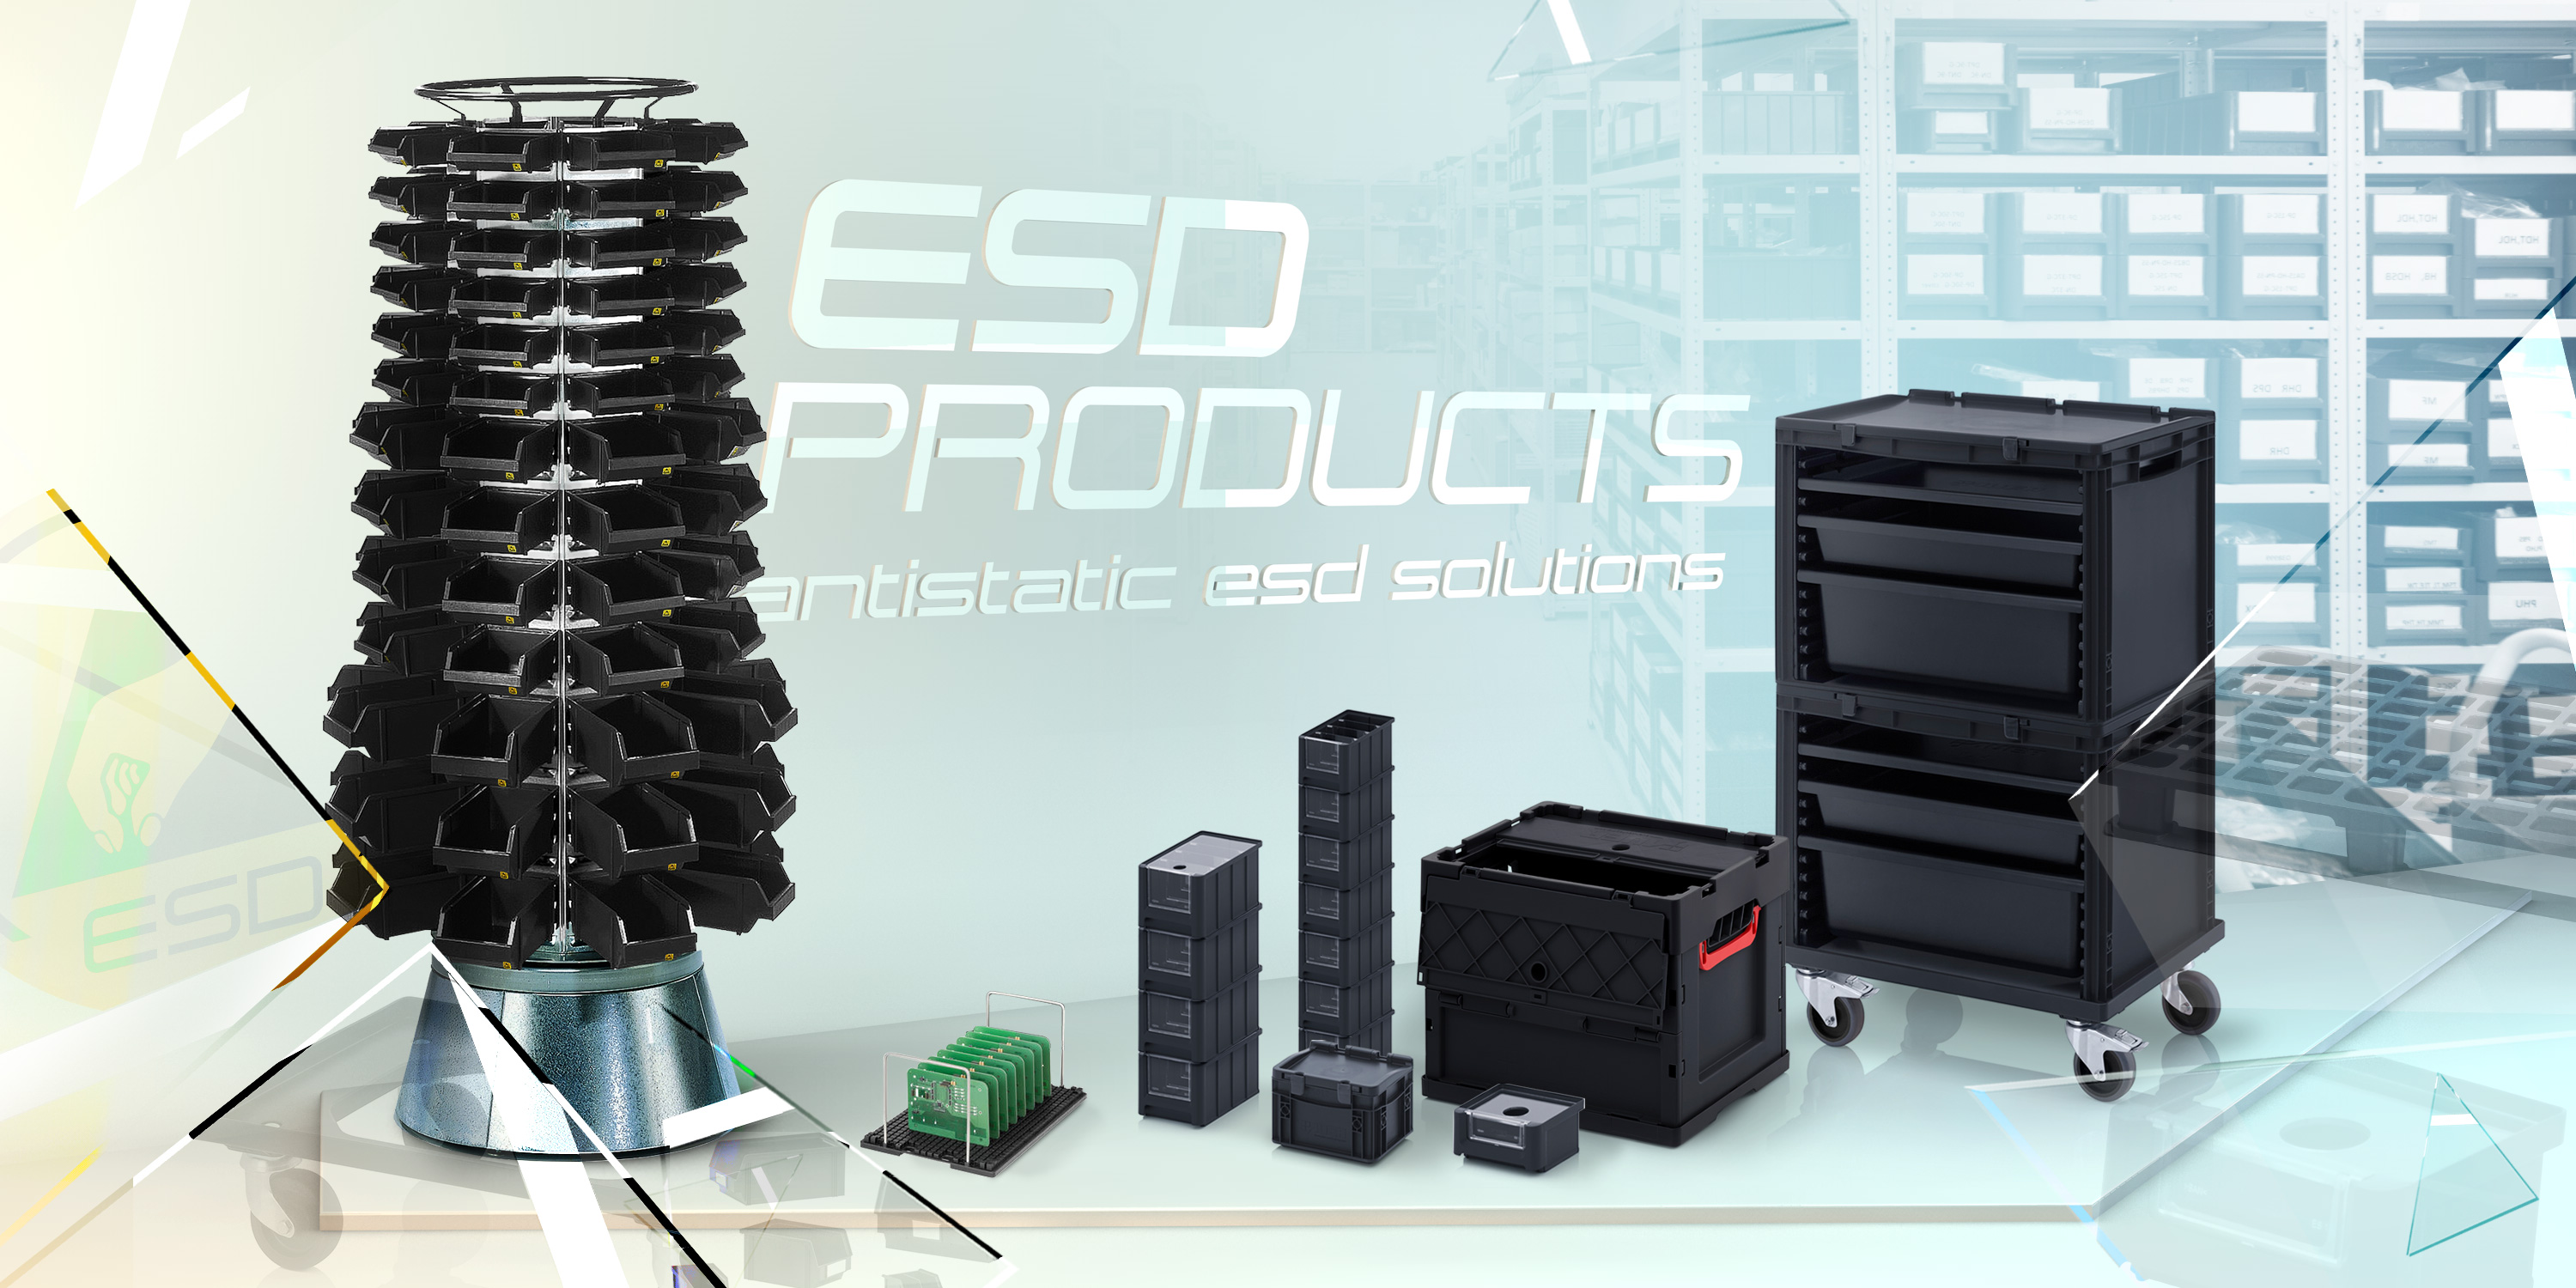 anti-static-esd-protective-storage-esd-warehousing-systems-esd-euro-containers-esd-boxes-esd-bins-esd-totes-esd-anti-static-packaging